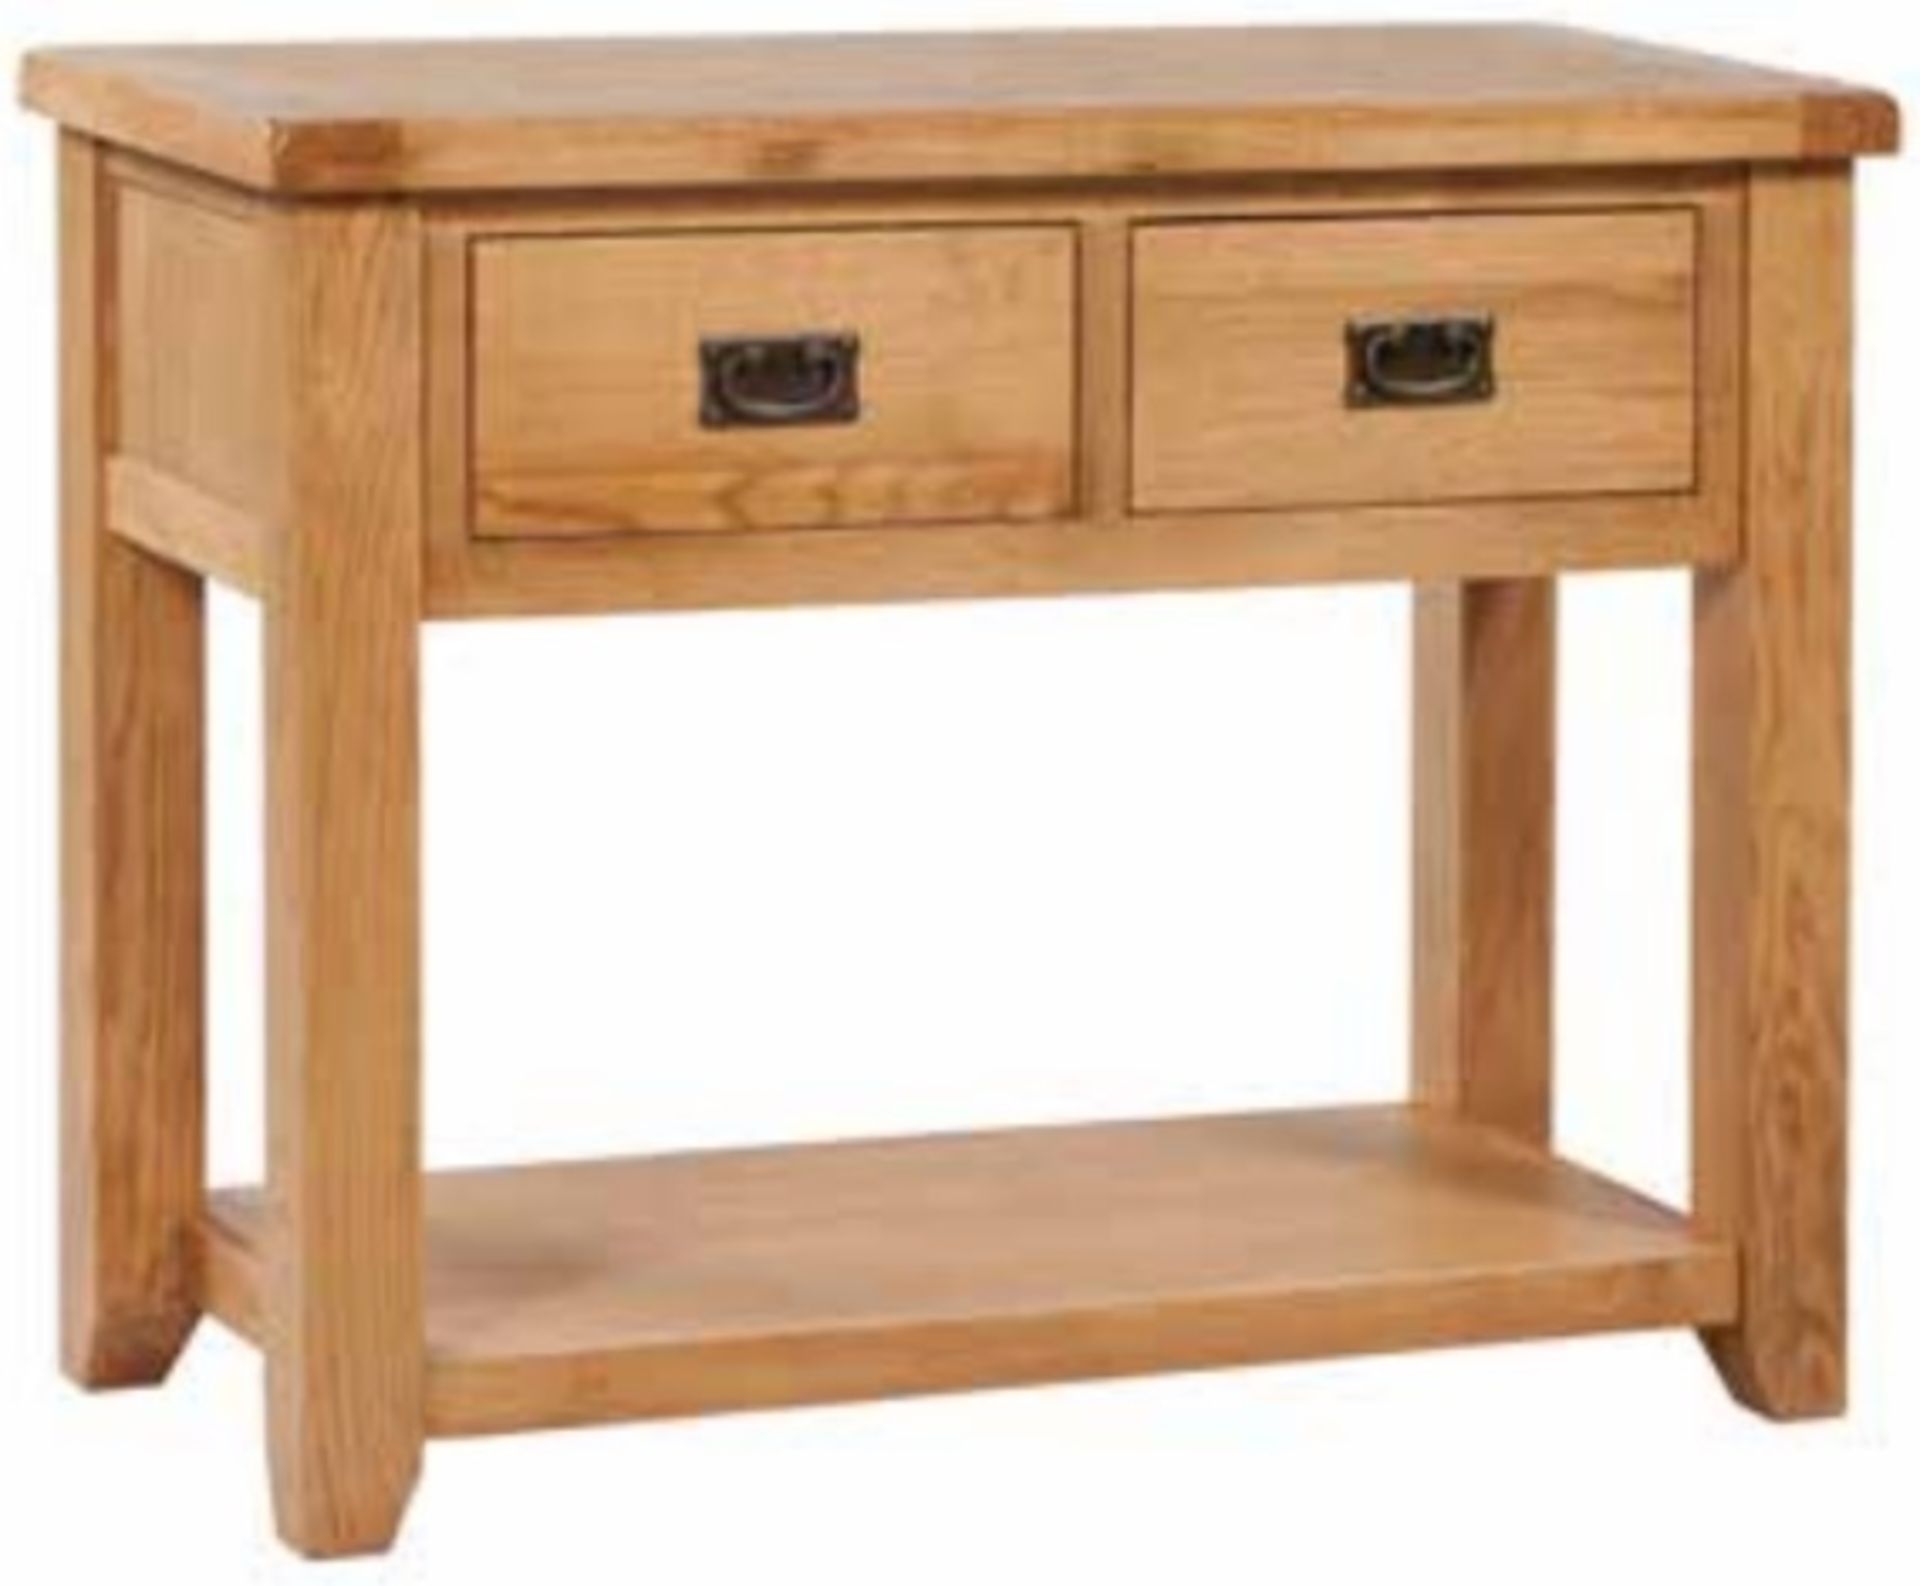 V *TRADE QTY* Brand New Chiswick Oak Large Console Table 100w x 45d x 80.5h cms ISP £284.00 (